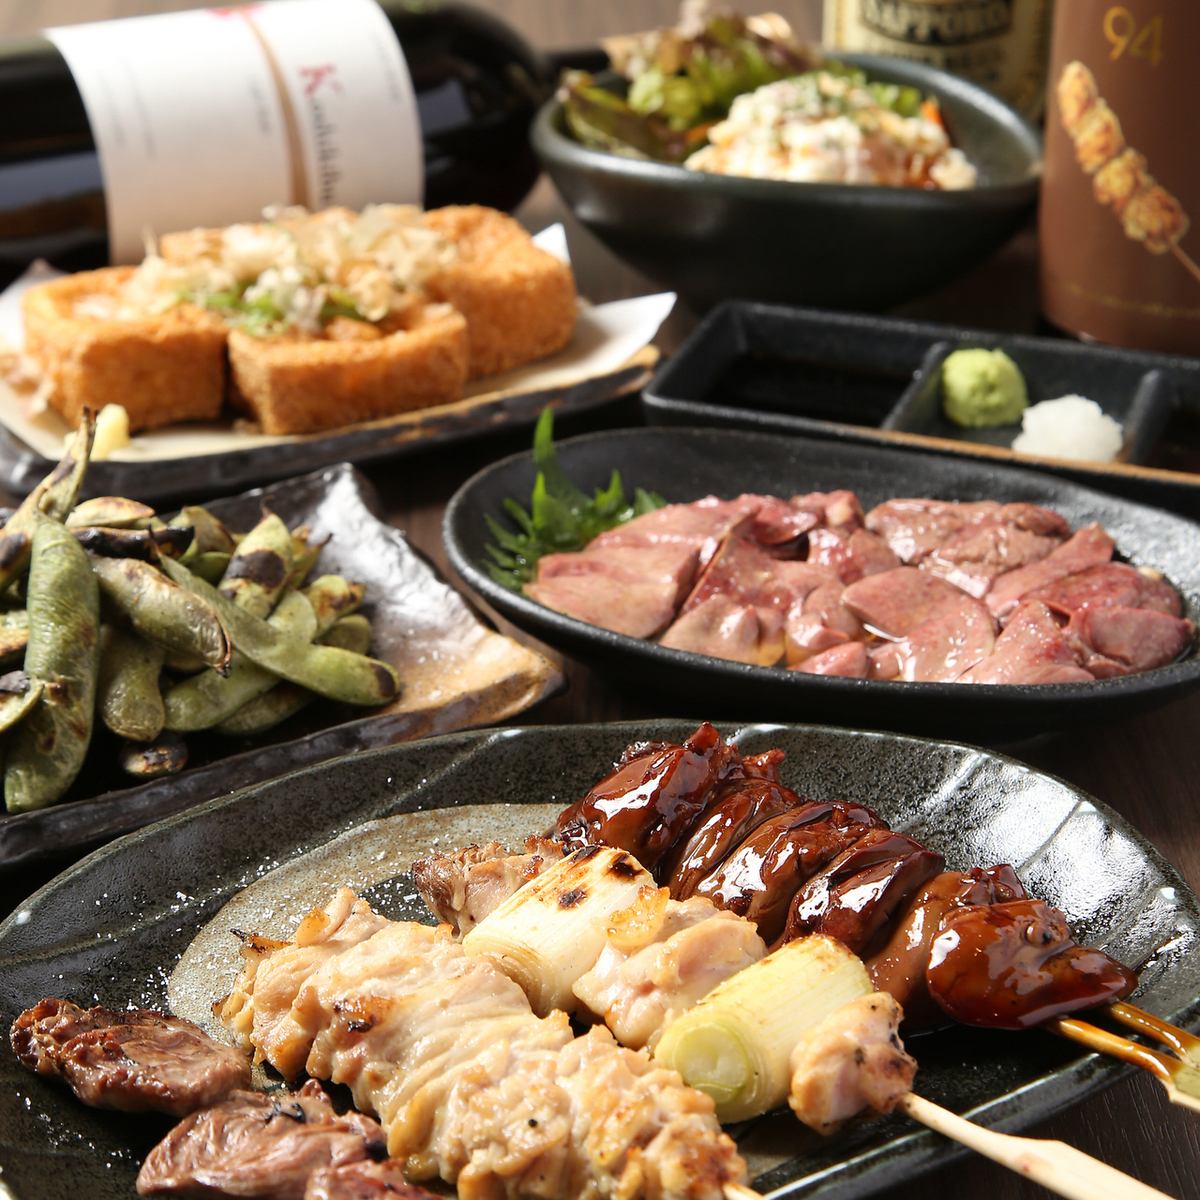 Enjoy delicious dishes such as charcoal-grilled yakitori and liver that go well with alcohol.